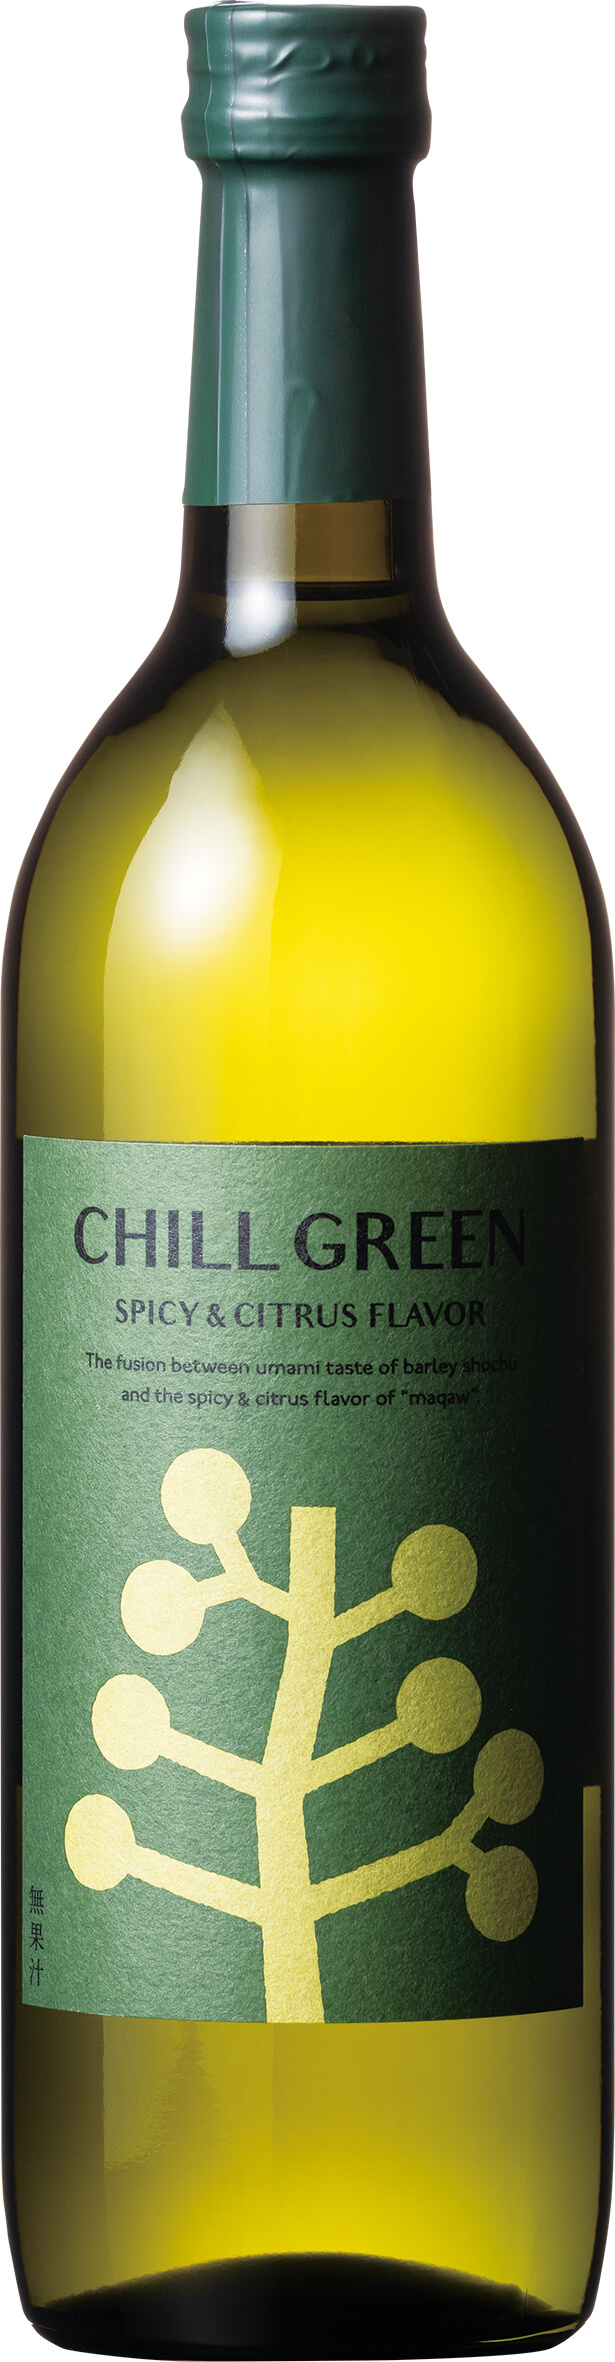 CHILL GREEN spicy & citrus